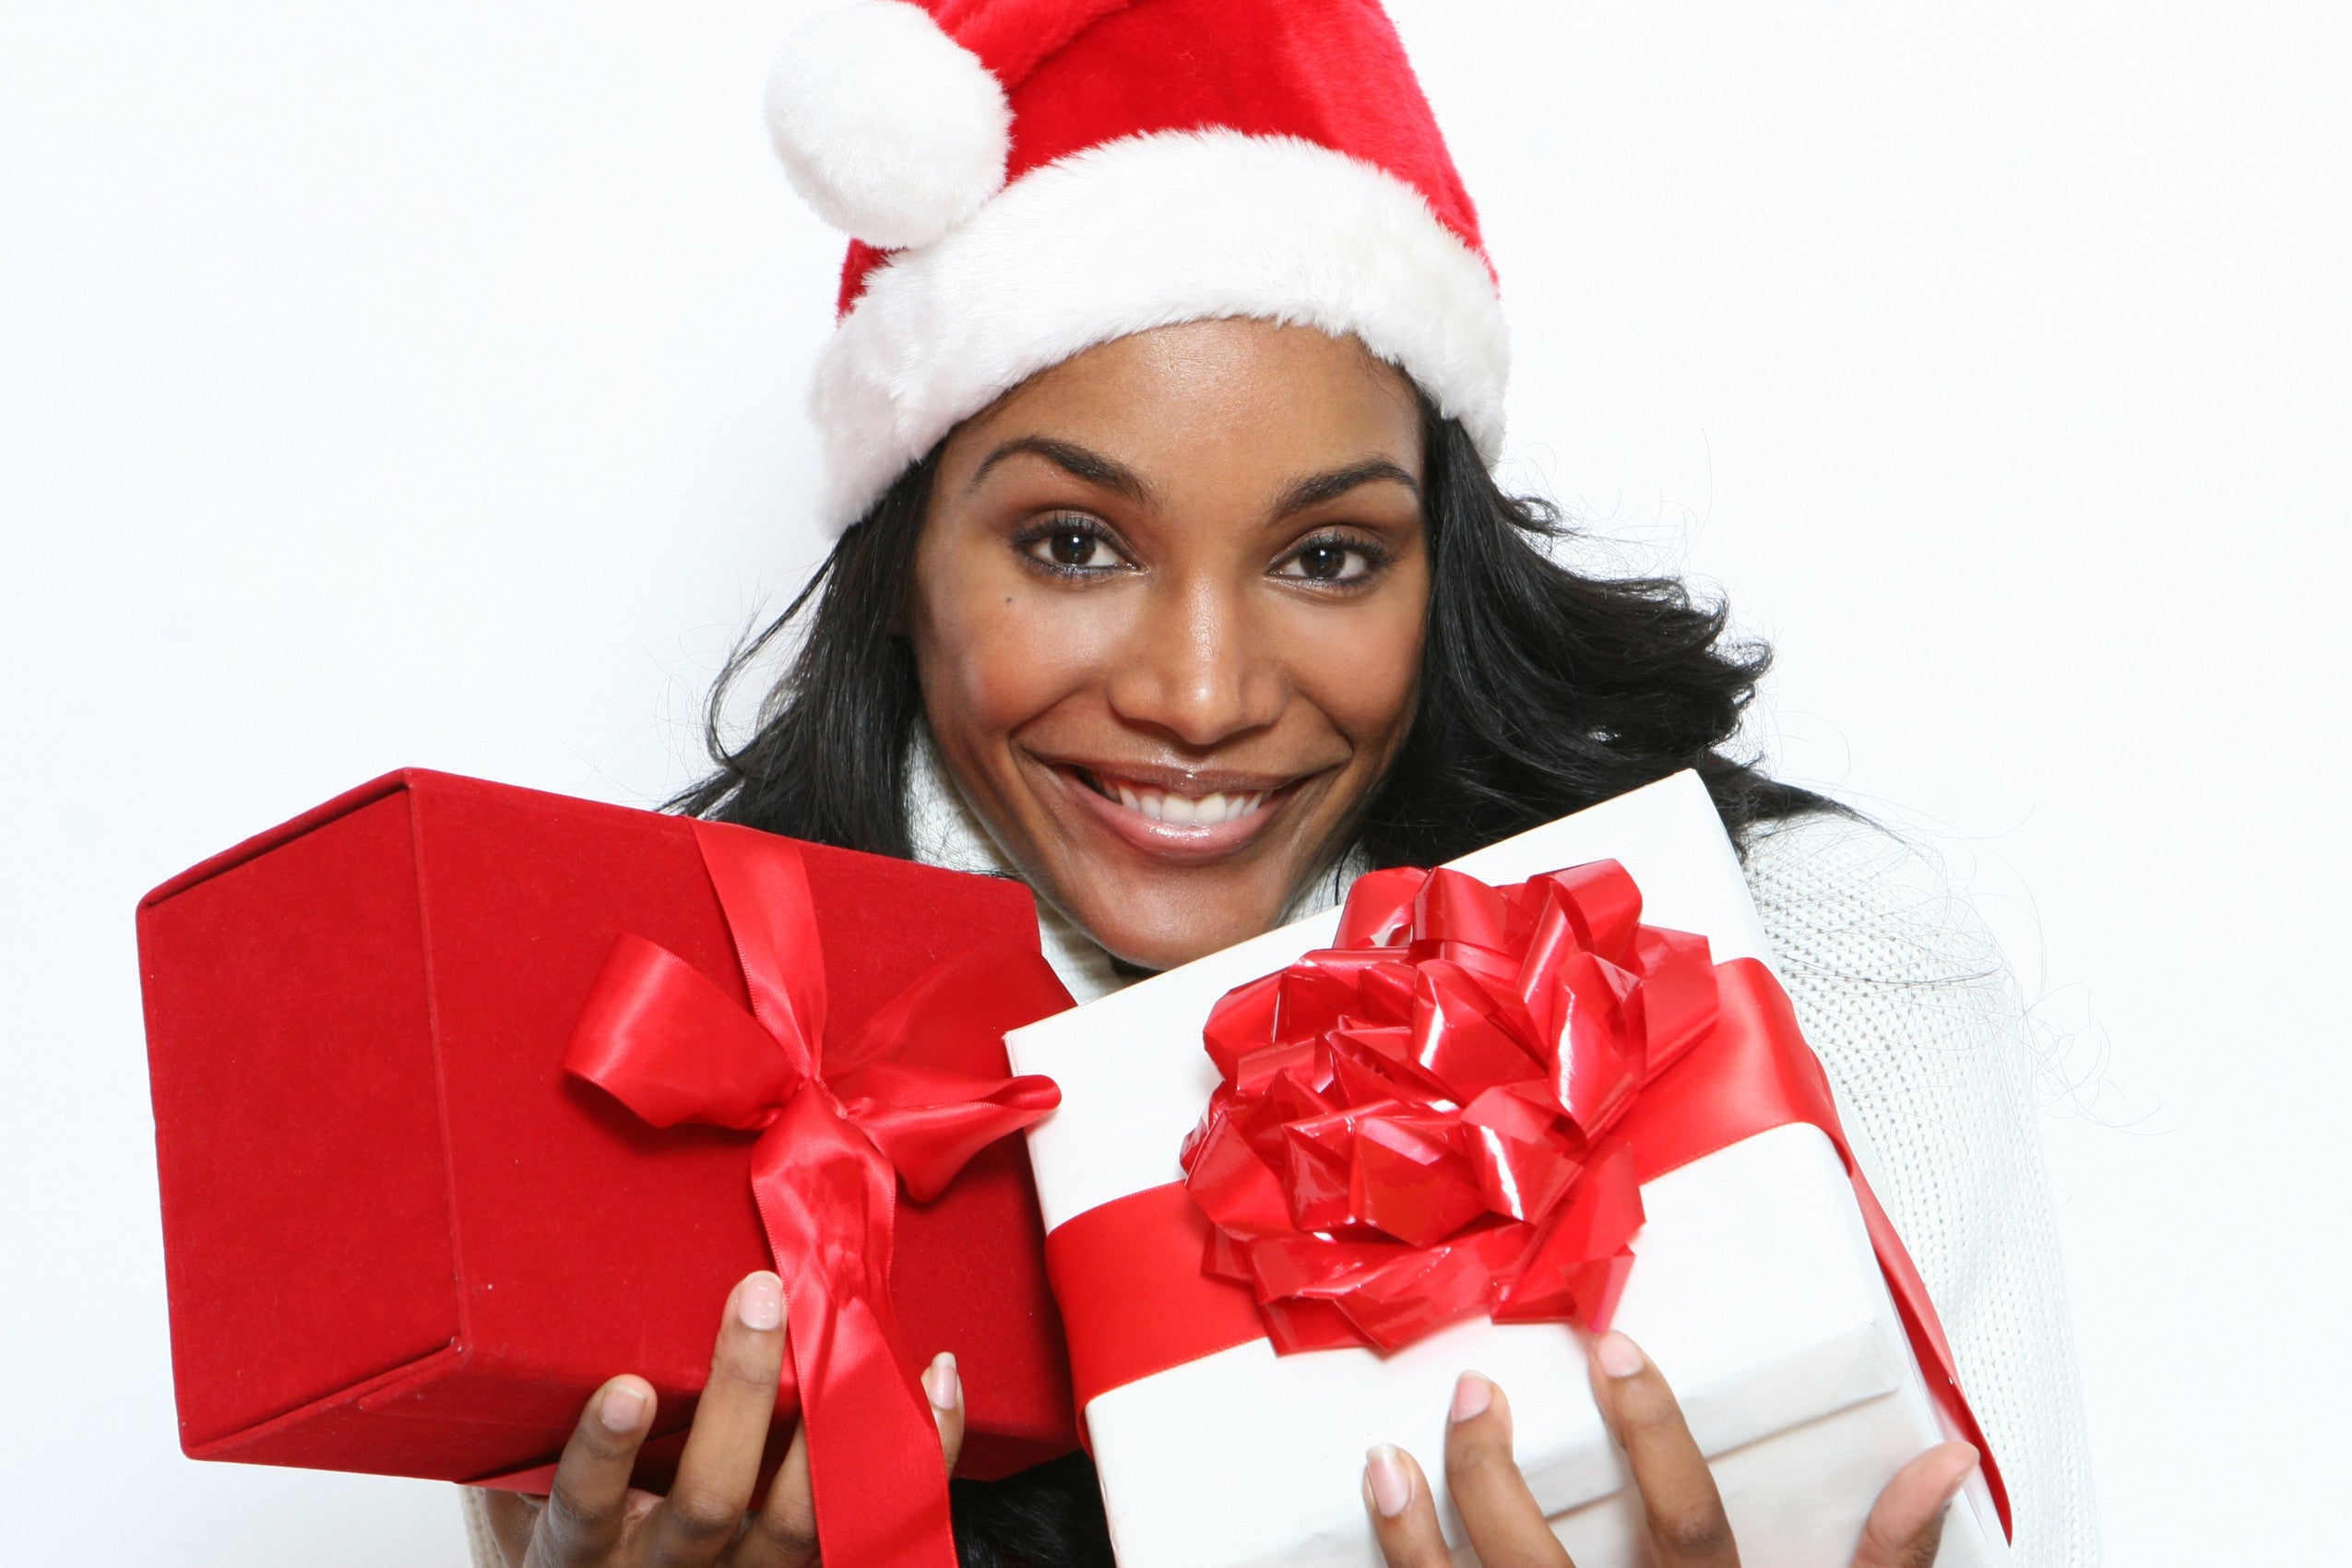 https://www.essence.com/wp-content/uploads/2011/12/images/2011/12/16/woman-with-holiday-gifts.jpg